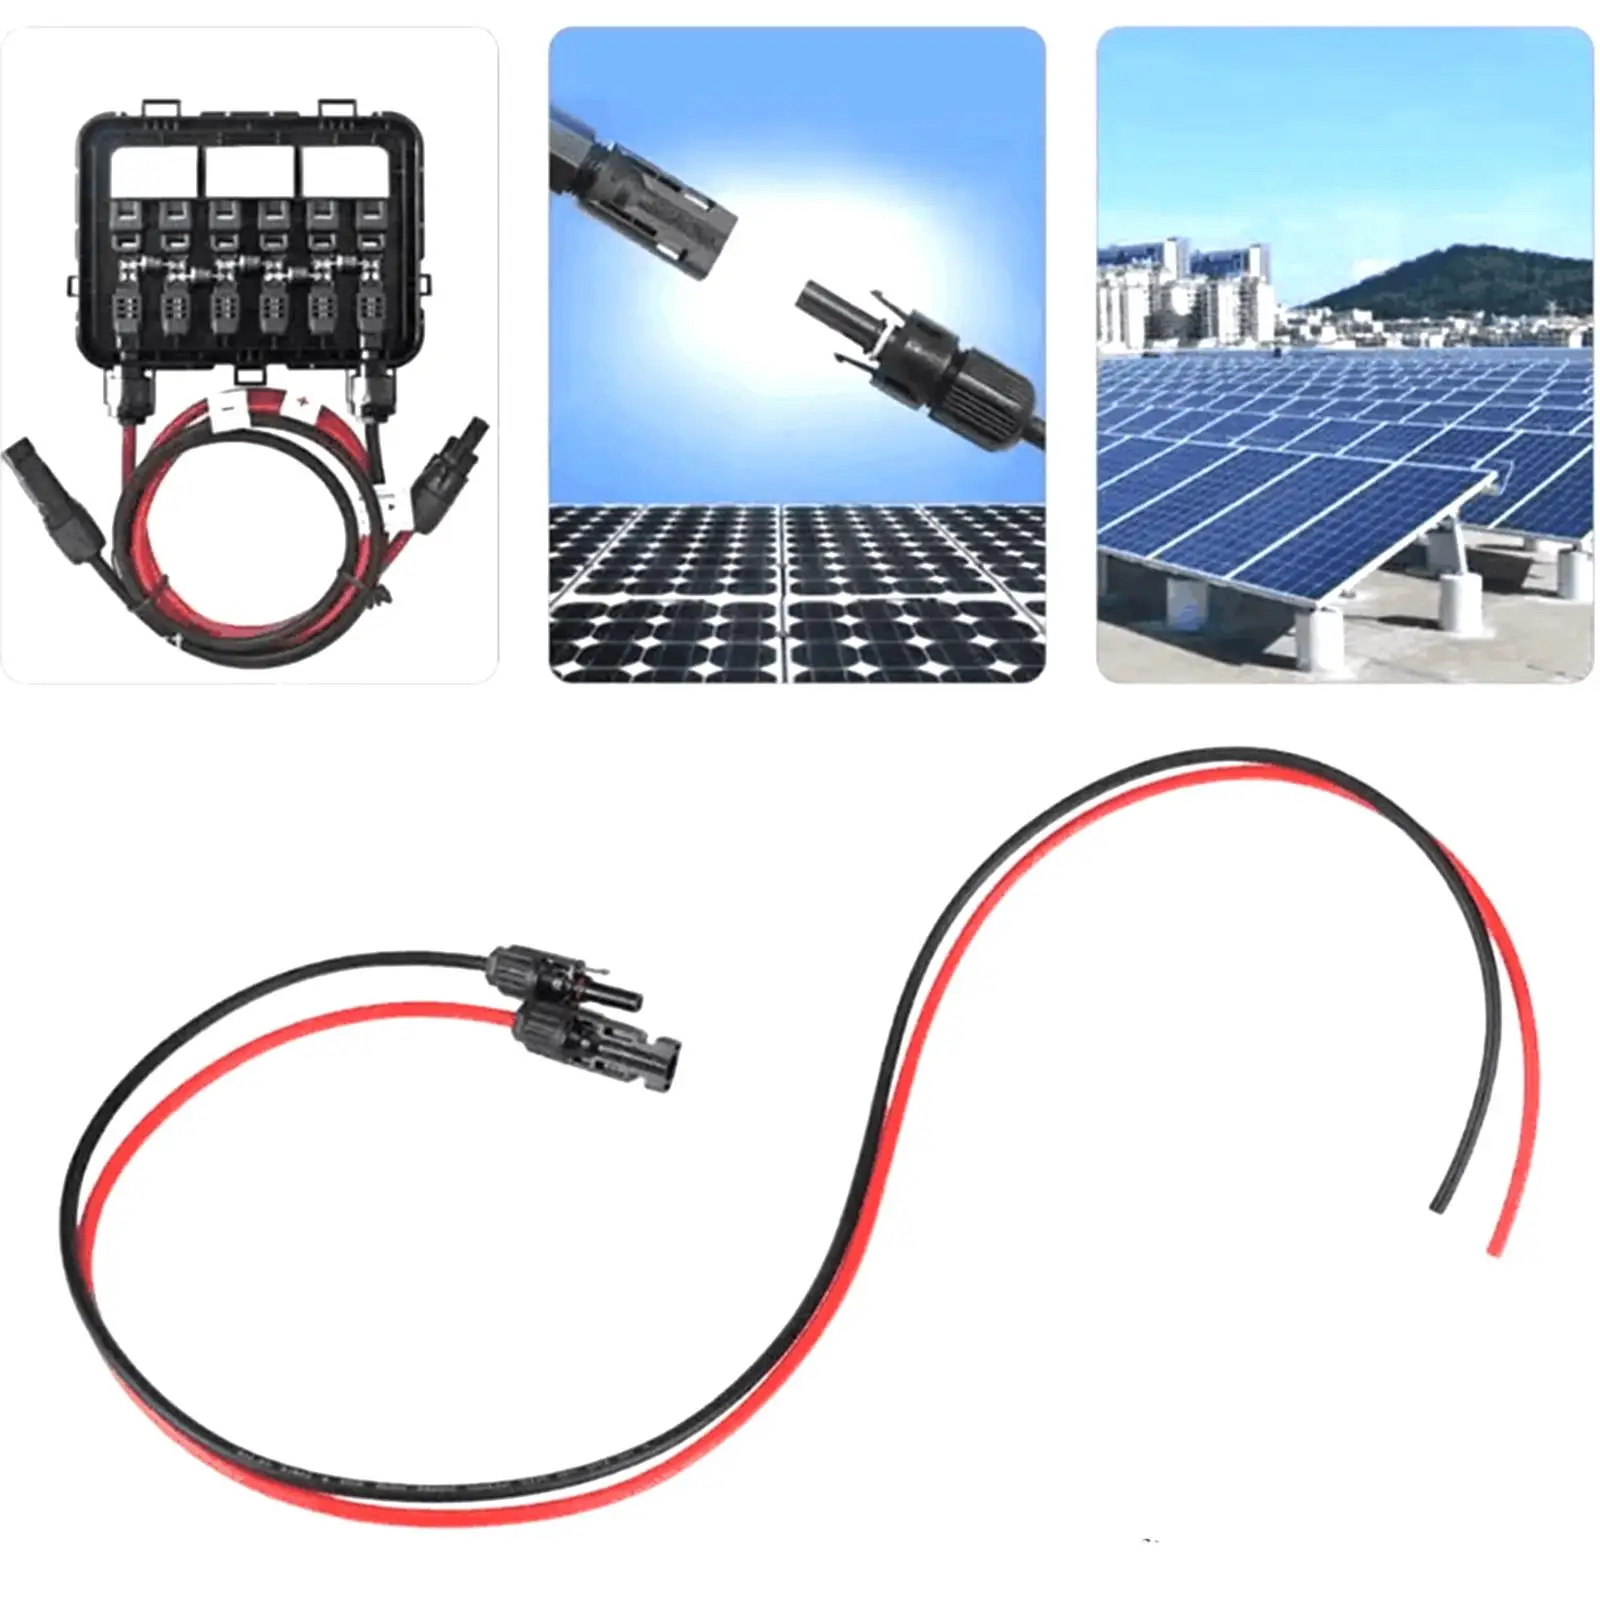 Solar Wire Extension PV Wire Harness Cords Black Red Connecting Connector Cable for Solar Panels Car Backpacking Traveling